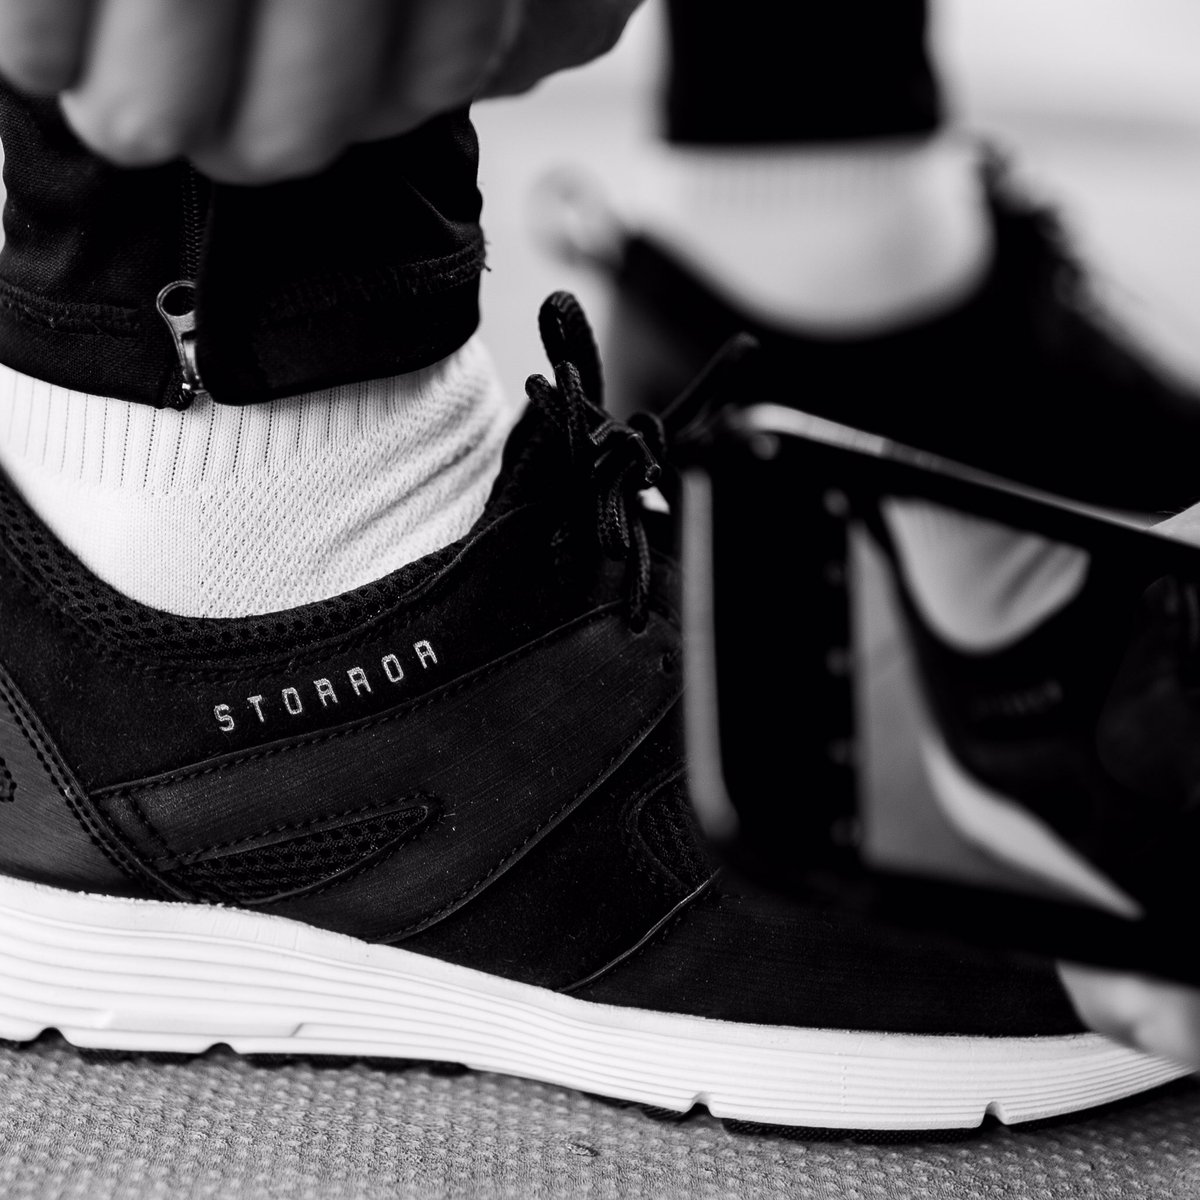 Mew Mew magnification Useless STORROR on Twitter: "The STORROR TENS Parkour shoe is now available for  pre-order 🚨 https://t.co/EX7YblB494 https://t.co/XXf69y6DRa" / Twitter